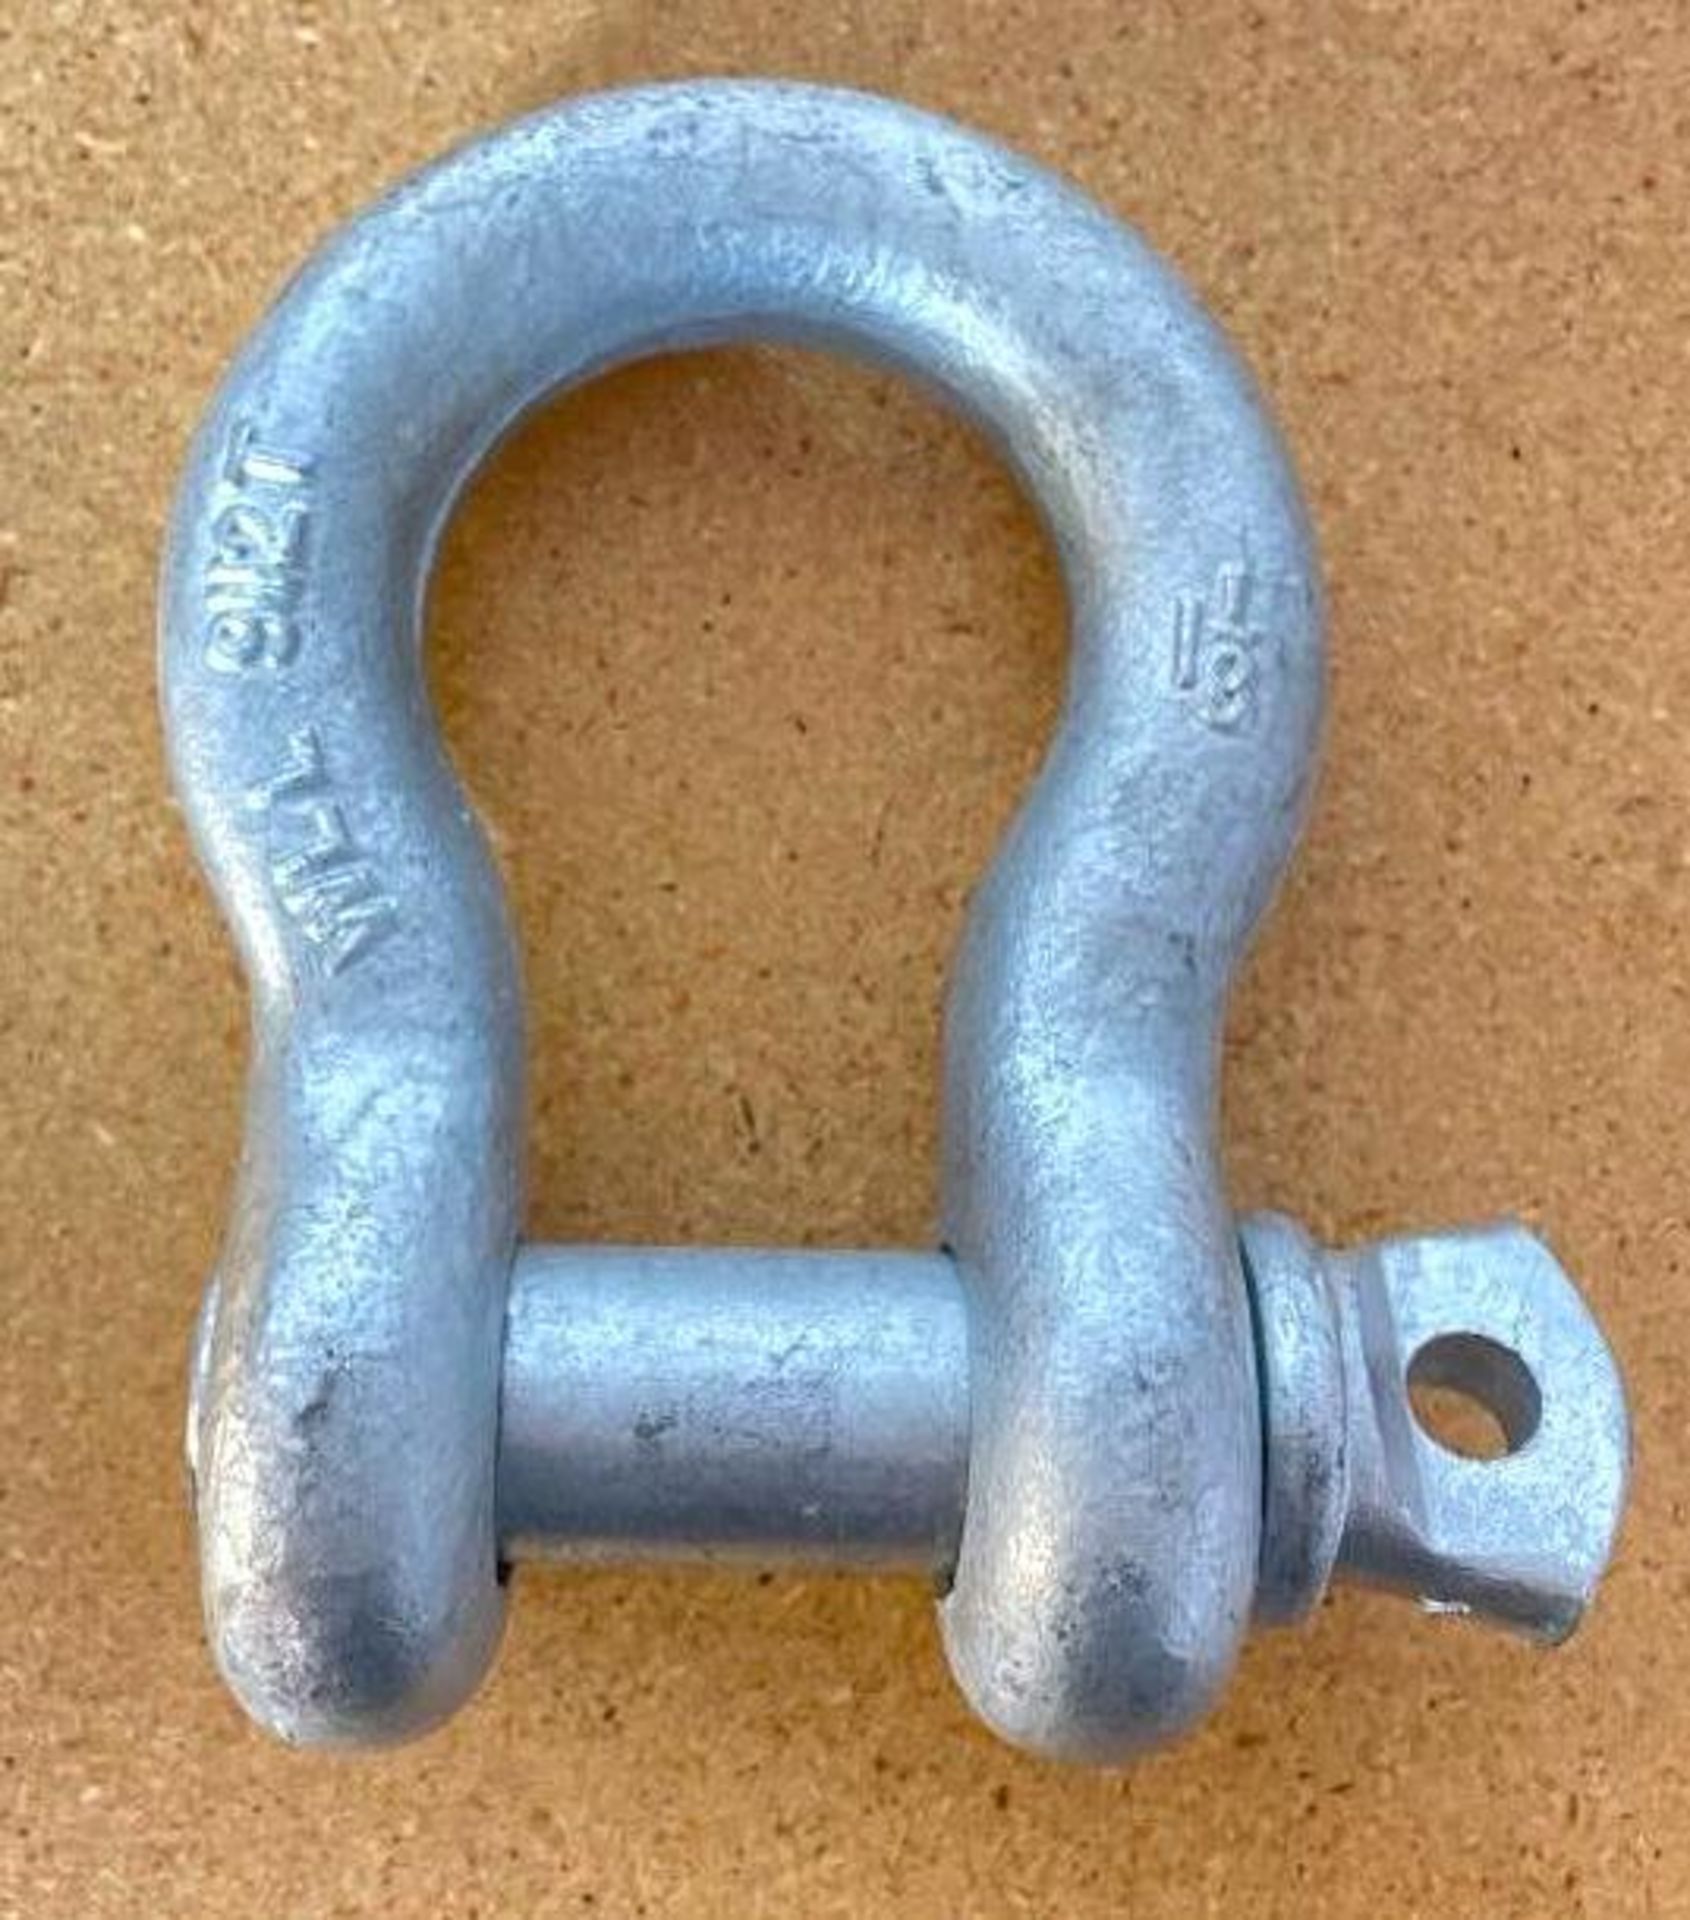 DESCRIPTION: (4) 1-1/8" SCREW PIN ANCHOR SHACKLE HDG (5-PACK) BRAND/MODEL: LACLEDE CHAIN CO SIZE: 1- - Image 6 of 8